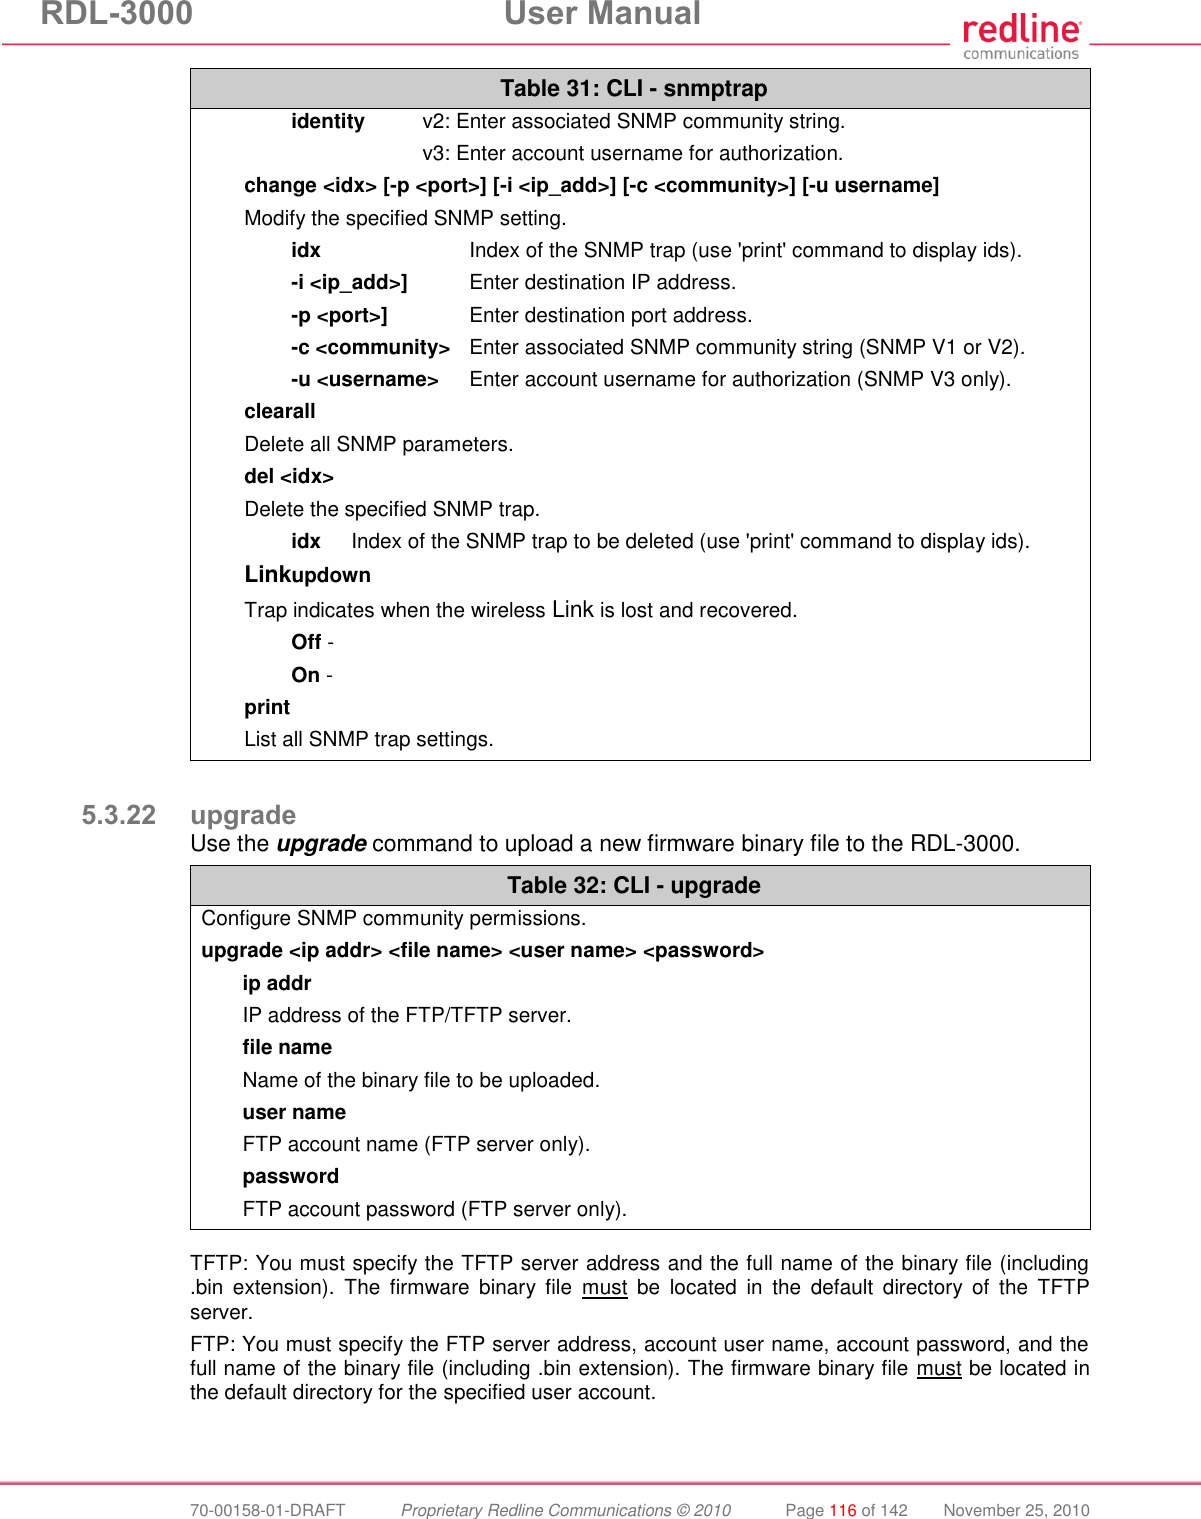 RDL-3000  User Manual  70-00158-01-DRAFT  Proprietary Redline Communications © 2010  Page 116 of 142  November 25, 2010 Table 31: CLI - snmptrap  identity  v2: Enter associated SNMP community string.     v3: Enter account username for authorization. change &lt;idx&gt; [-p &lt;port&gt;] [-i &lt;ip_add&gt;] [-c &lt;community&gt;] [-u username] Modify the specified SNMP setting.  idx  Index of the SNMP trap (use &apos;print&apos; command to display ids).  -i &lt;ip_add&gt;]  Enter destination IP address.  -p &lt;port&gt;]  Enter destination port address.  -c &lt;community&gt;  Enter associated SNMP community string (SNMP V1 or V2).  -u &lt;username&gt;  Enter account username for authorization (SNMP V3 only). clearall Delete all SNMP parameters. del &lt;idx&gt; Delete the specified SNMP trap.   idx  Index of the SNMP trap to be deleted (use &apos;print&apos; command to display ids). Linkupdown Trap indicates when the wireless Link is lost and recovered.  Off -   On -  print List all SNMP trap settings.  5.3.22 upgrade Use the upgrade command to upload a new firmware binary file to the RDL-3000. Table 32: CLI - upgrade Configure SNMP community permissions. upgrade &lt;ip addr&gt; &lt;file name&gt; &lt;user name&gt; &lt;password&gt; ip addr   IP address of the FTP/TFTP server. file name   Name of the binary file to be uploaded. user name   FTP account name (FTP server only). password   FTP account password (FTP server only).   TFTP: You must specify the TFTP server address and the full name of the binary file (including .bin  extension).  The  firmware  binary  file  must  be  located  in  the  default  directory  of  the  TFTP server. FTP: You must specify the FTP server address, account user name, account password, and the full name of the binary file (including .bin extension). The firmware binary file must be located in the default directory for the specified user account.  